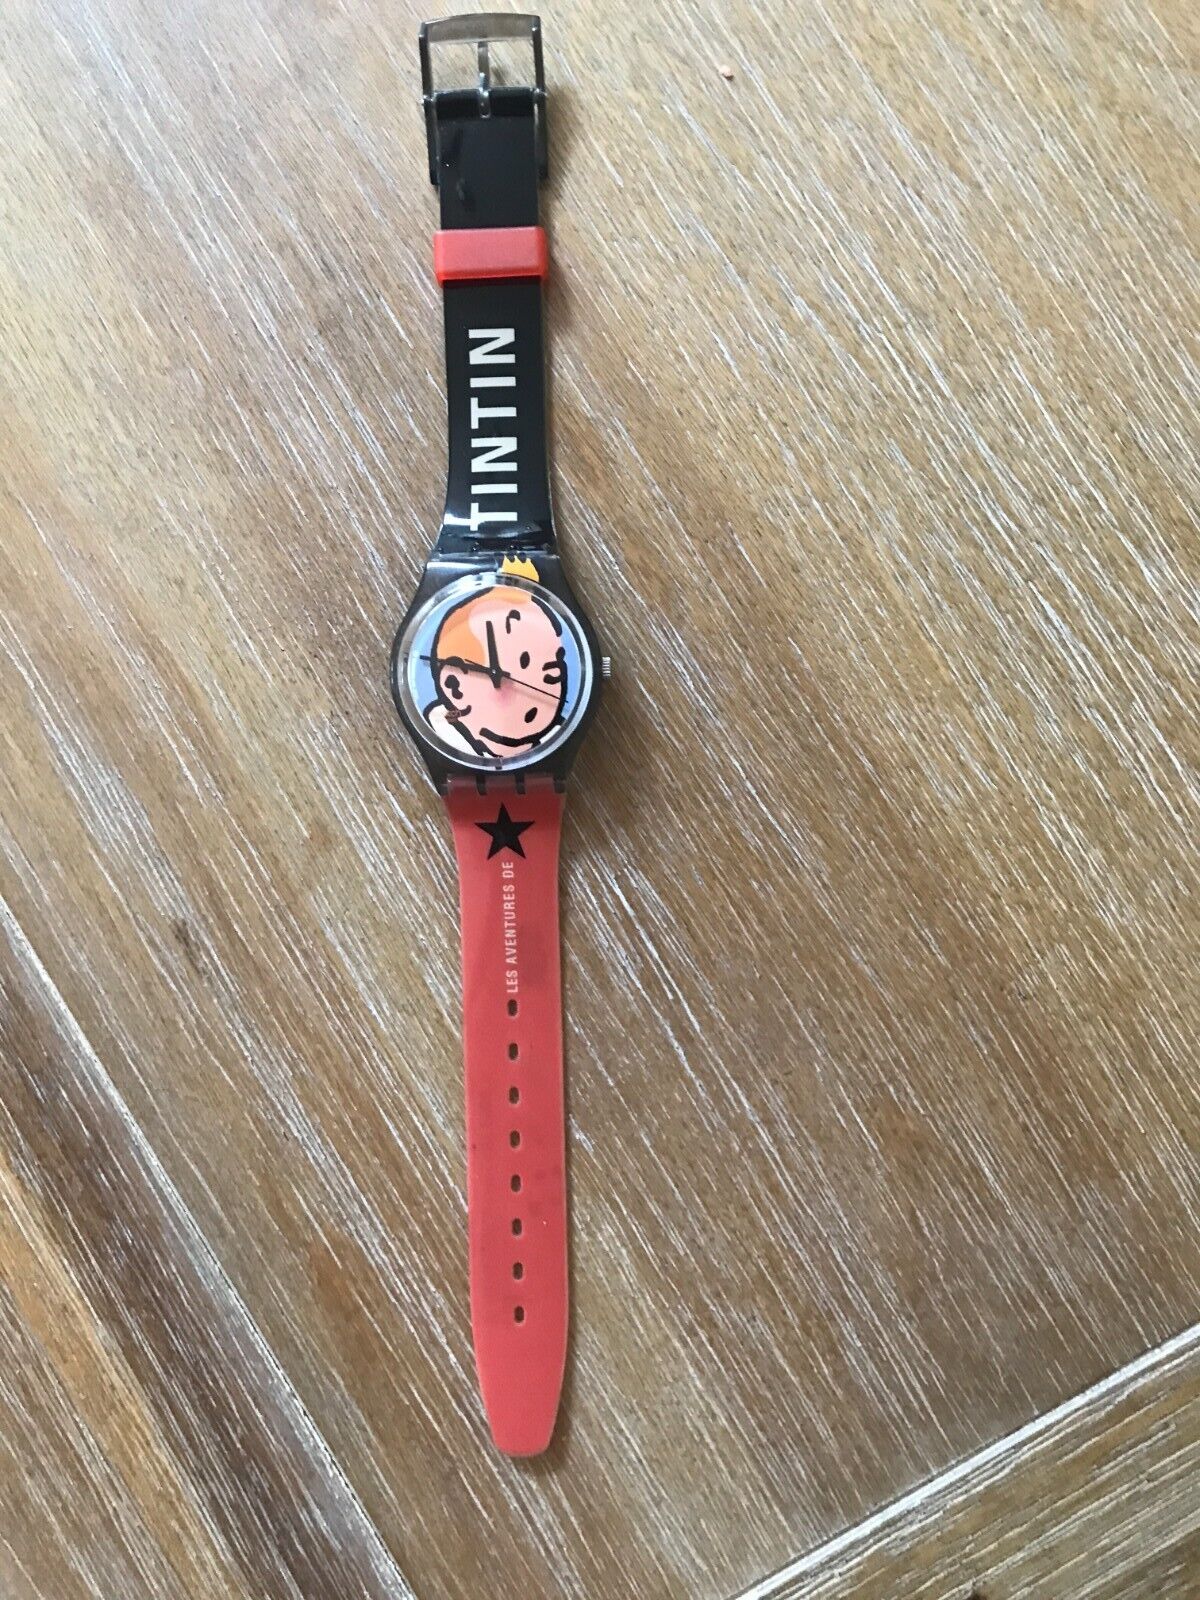 Tintin wrist watch 2004 Moulinsart Herge, IT WORKS: NEVER BEEN USED